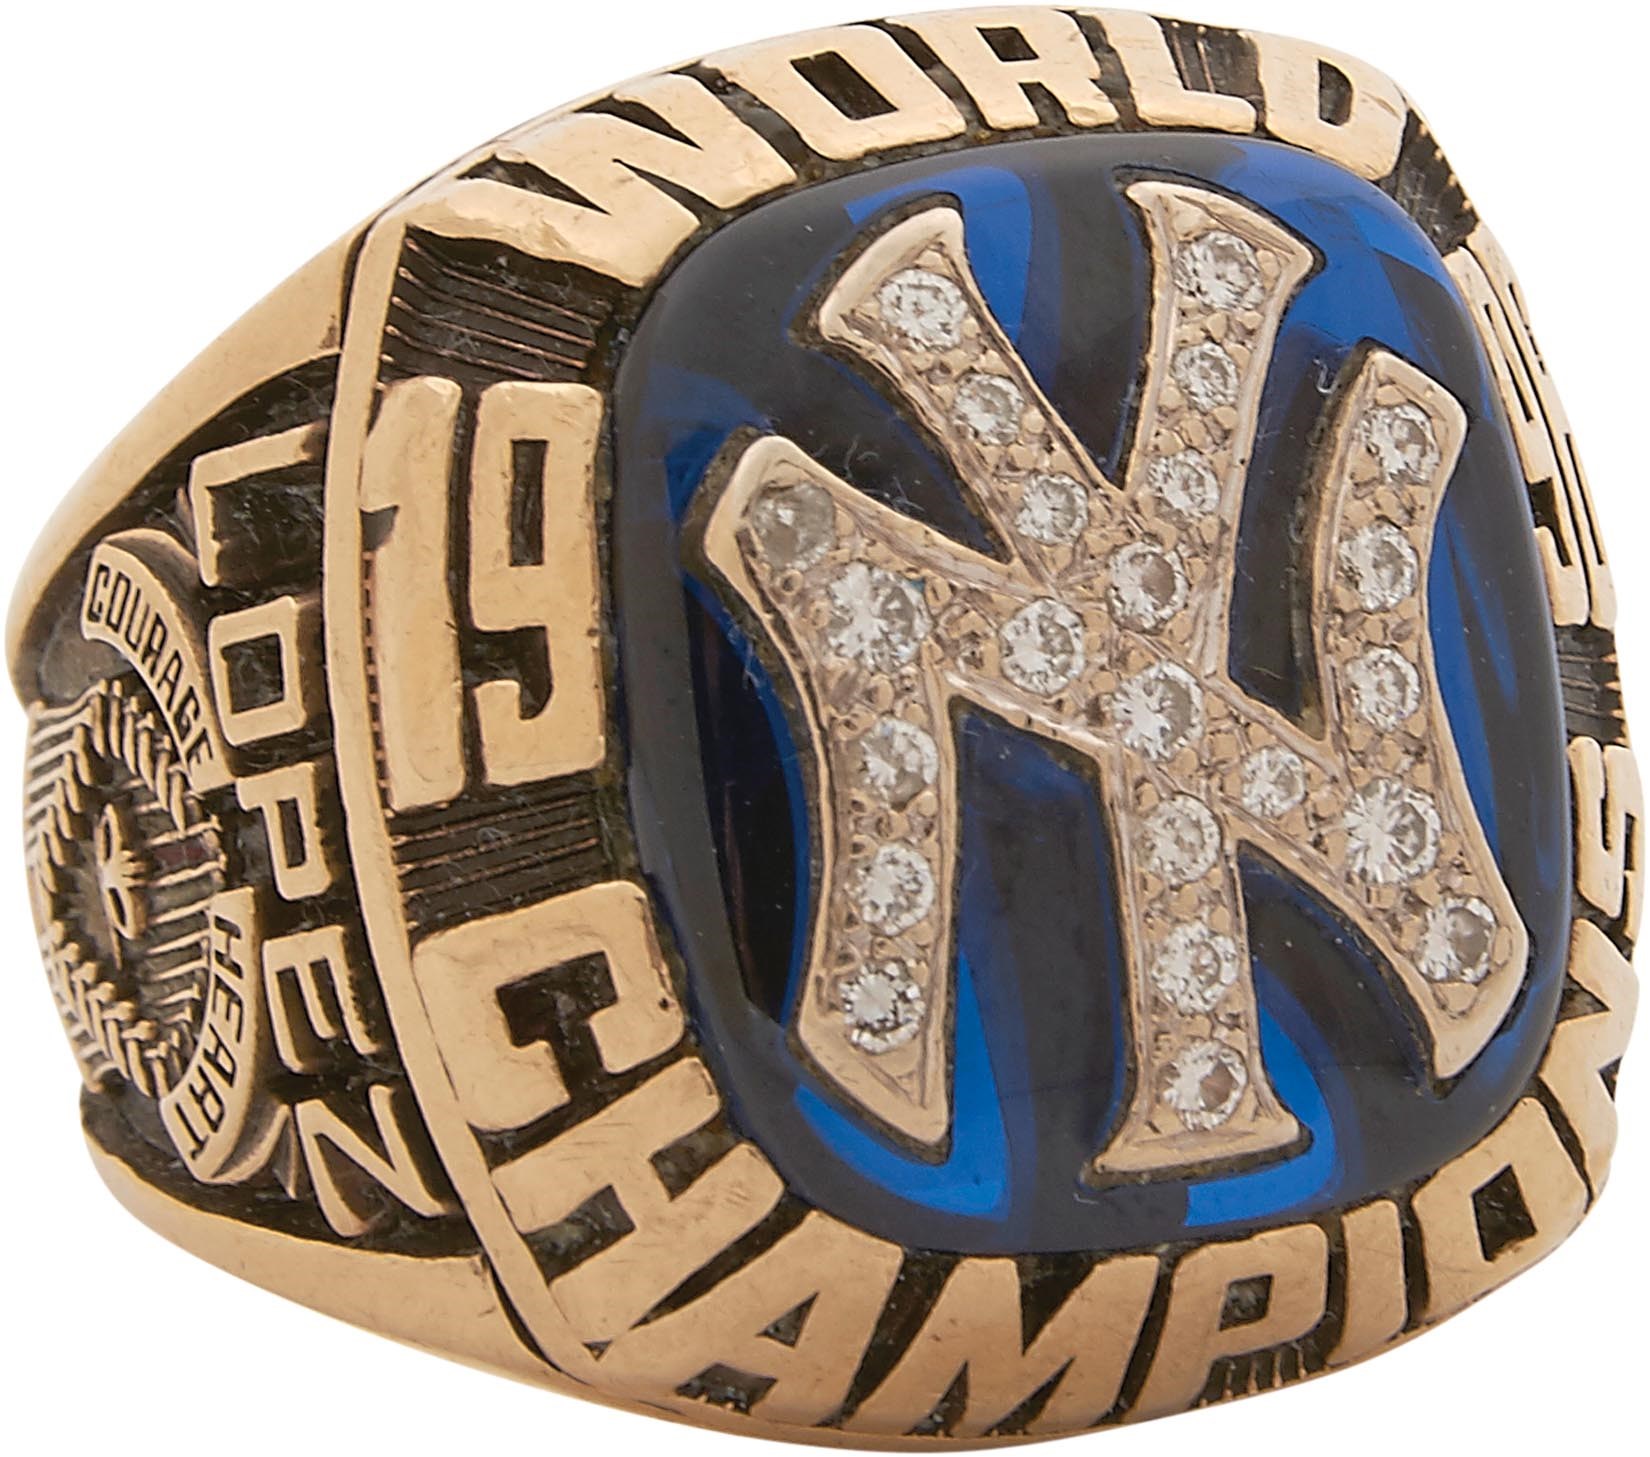 Sports Rings And Awards - 1996 New York Yankees World Series Championship Ring Presented to Hector Lopez